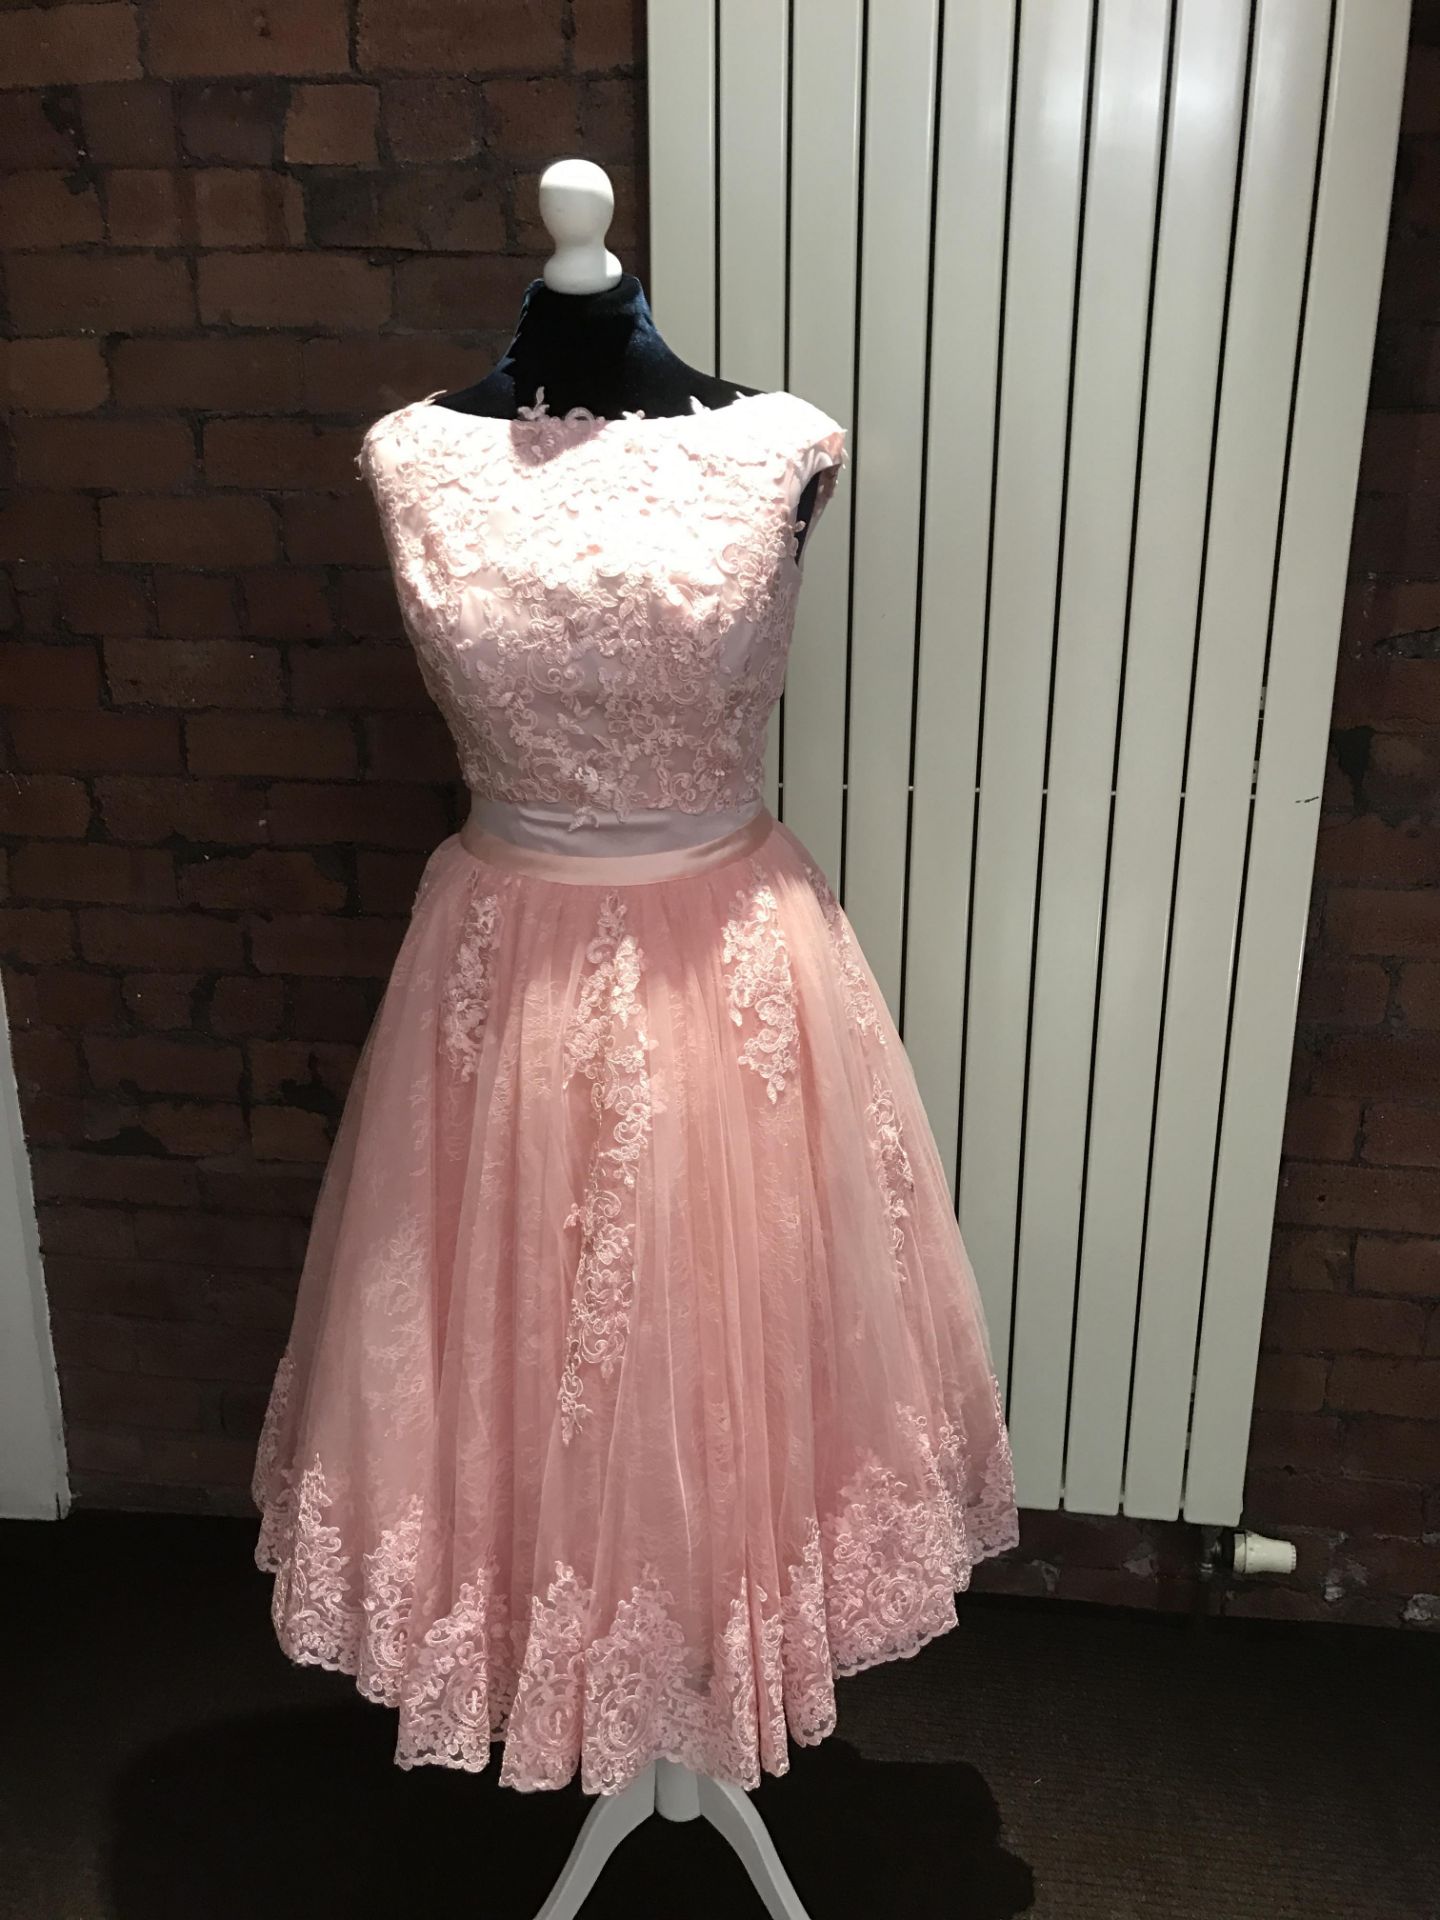 New Calf Length Vintaged Inspired Lace Bridesmaid/Occasional Skirt in Blush size 14. ONLY THE